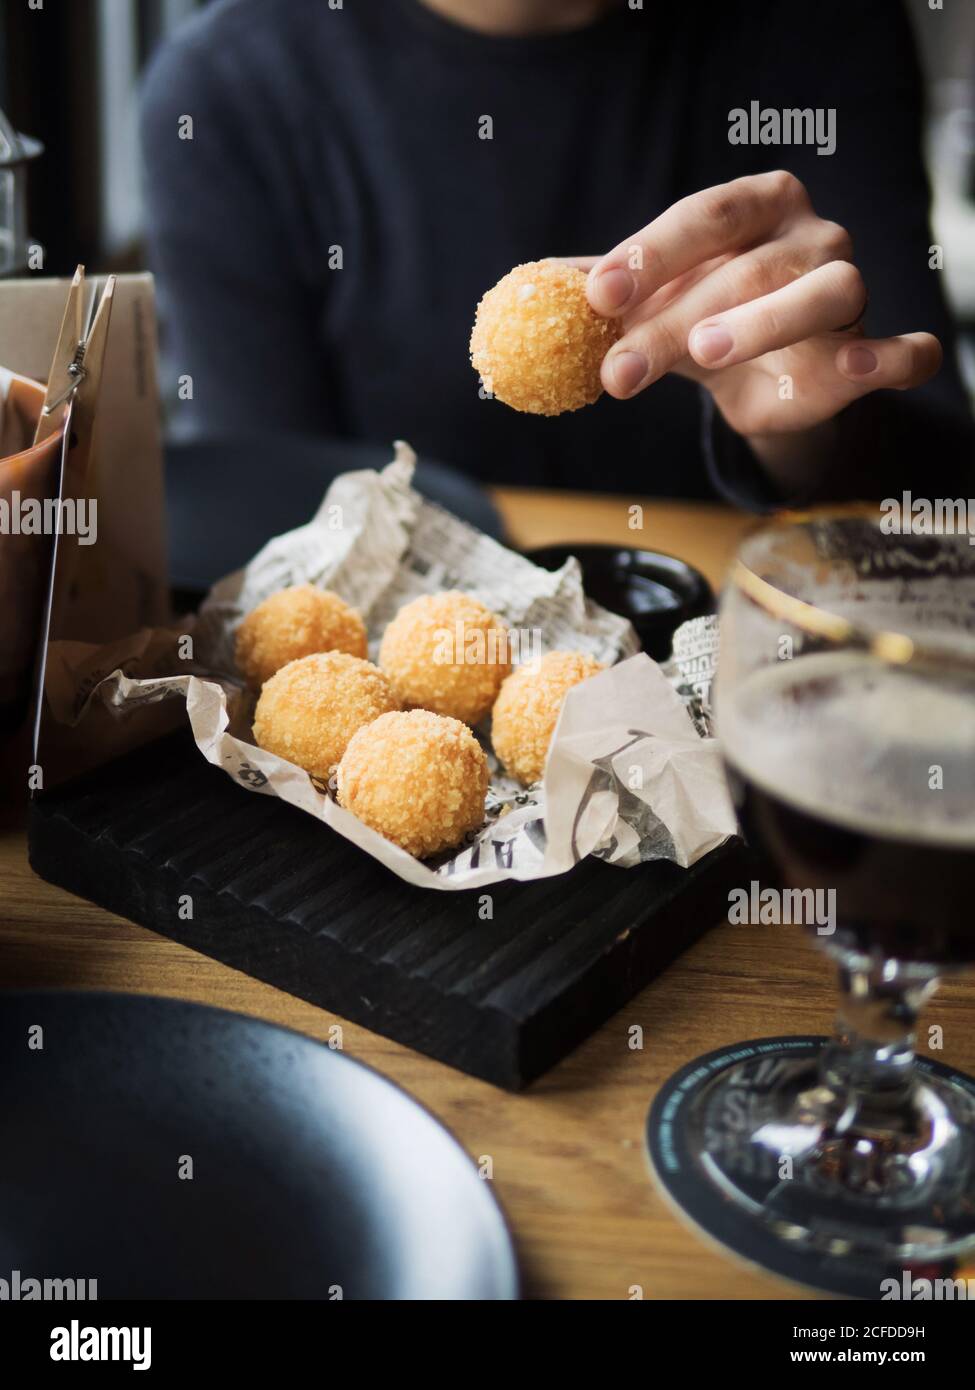 Crop female holding delicious cheese ball with mozzarella filling while sitting at table in cafe Stock Photo